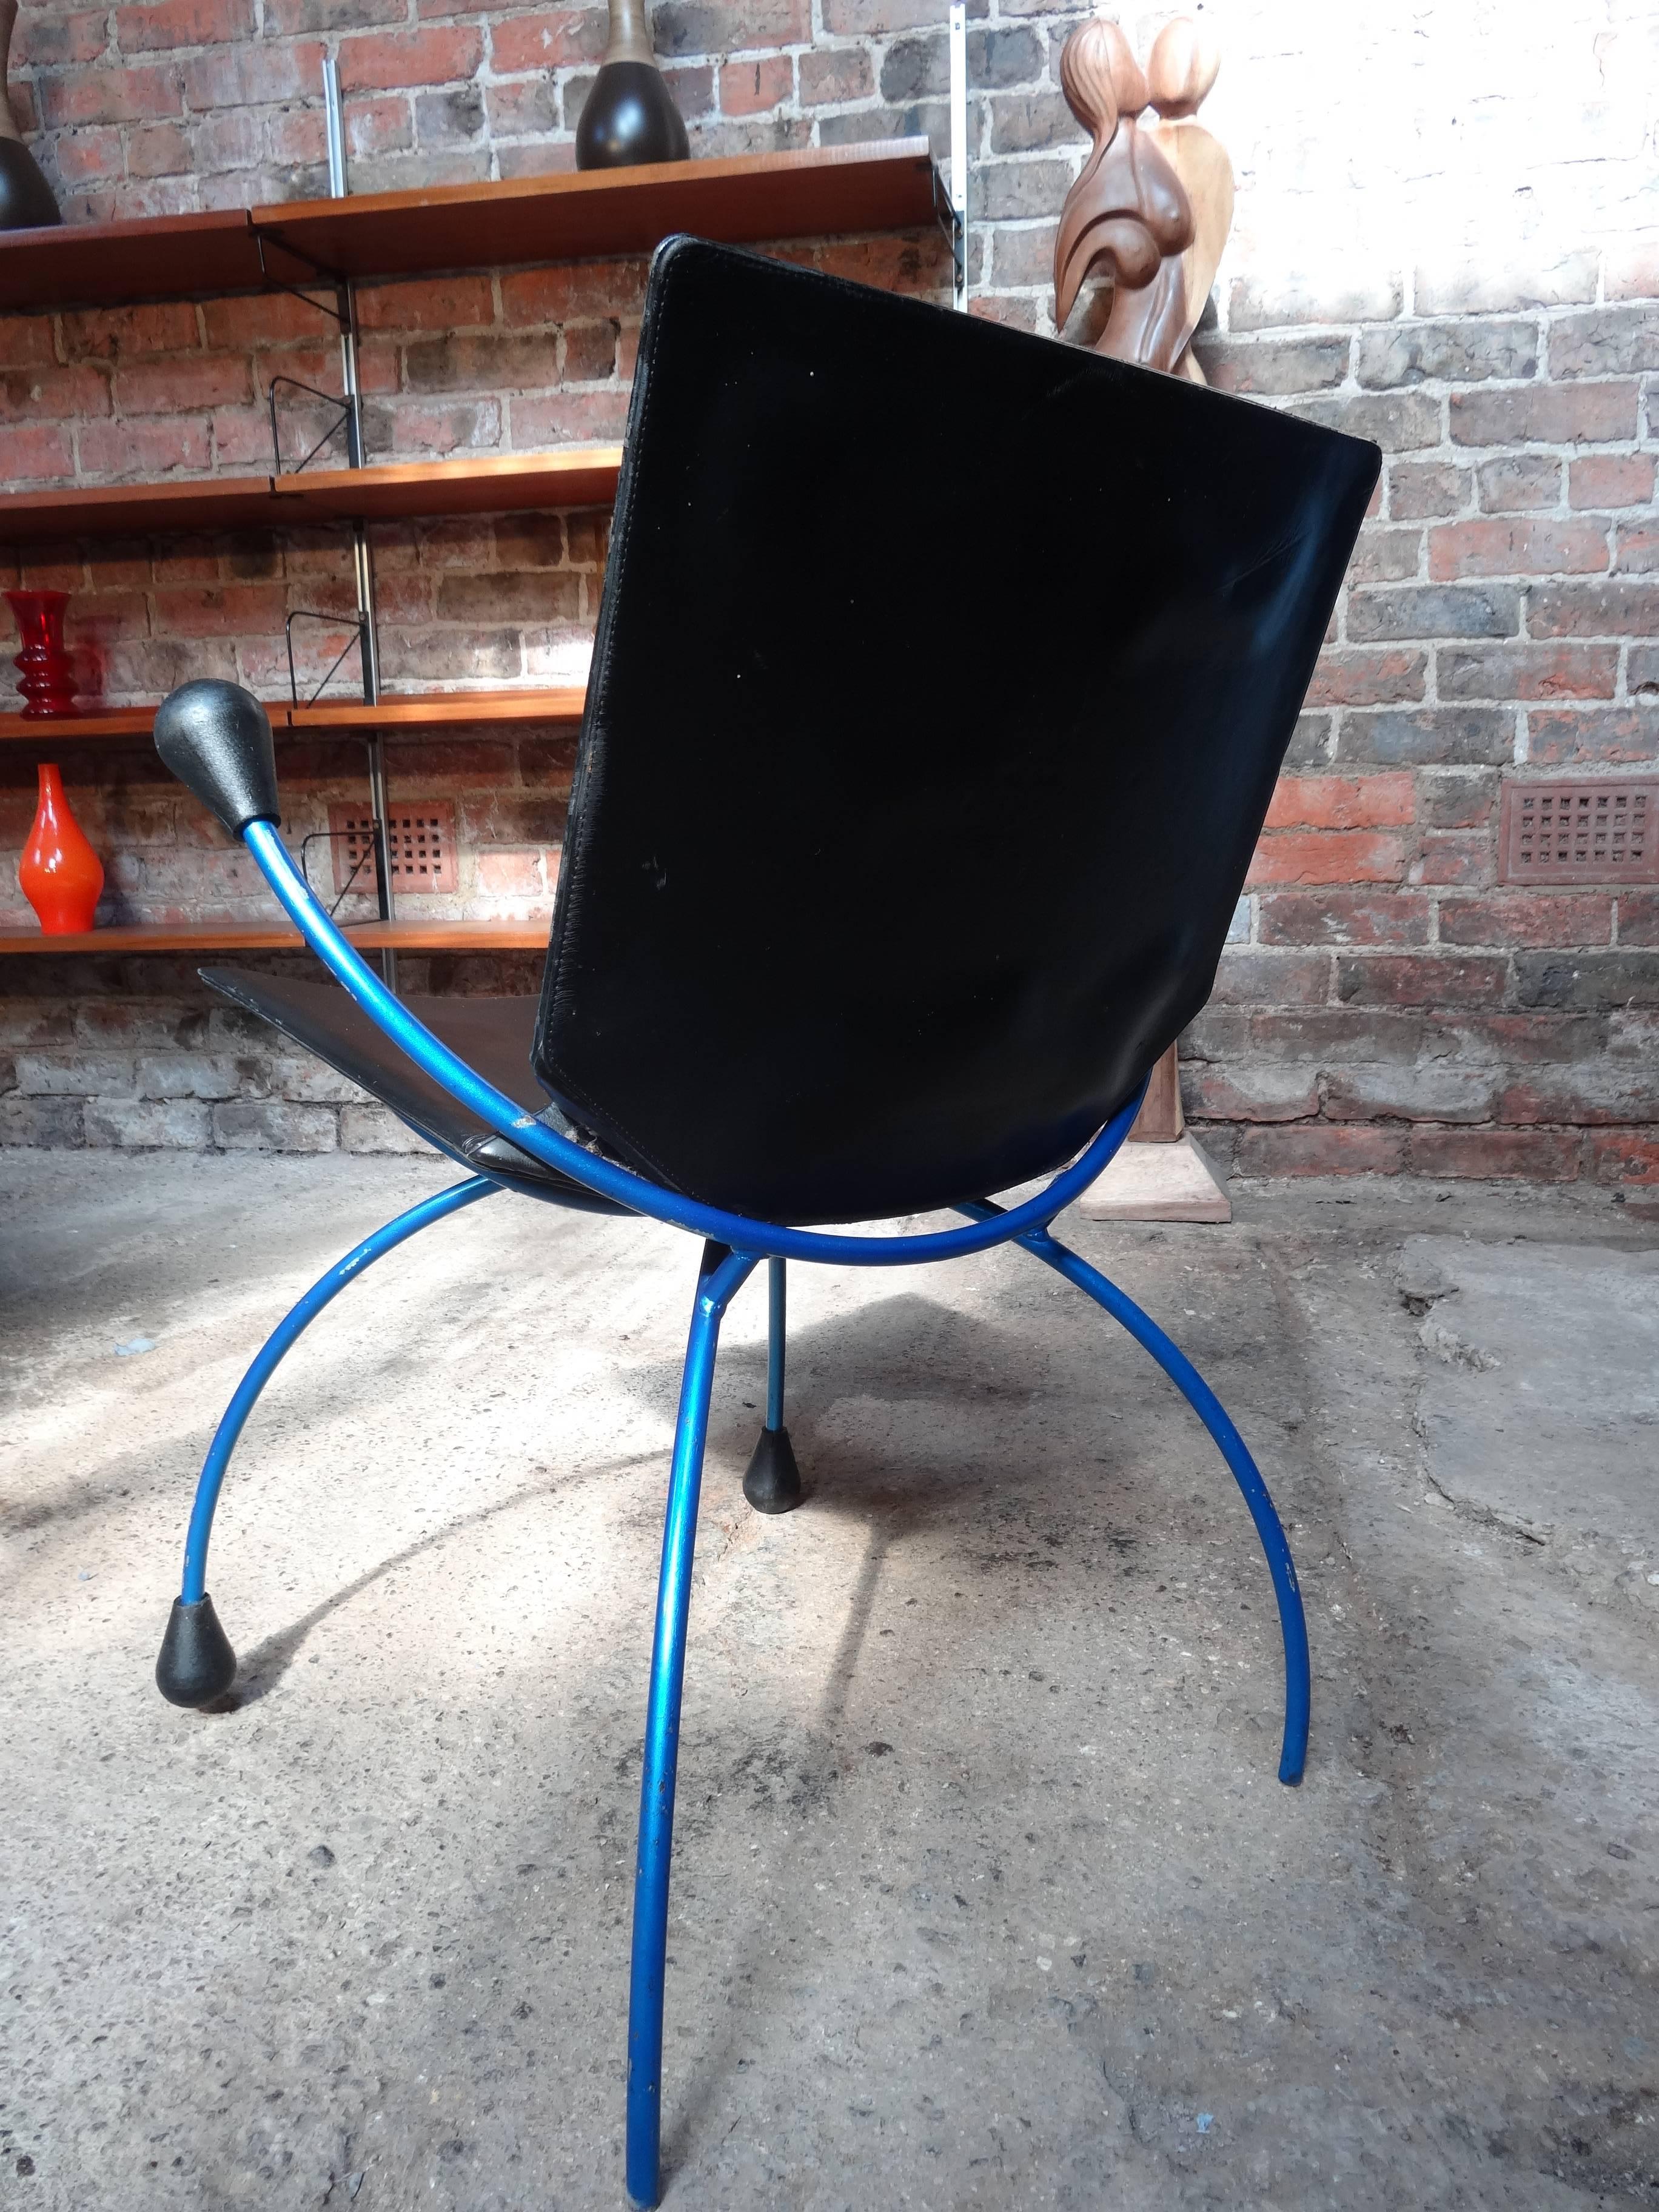 Stunning pair of very unusual blue metal framed 'spider' chairs, price is for the two chairs. 

Measures: Seat height 50cm, height 77cm, depth 50cm, width 64cm.